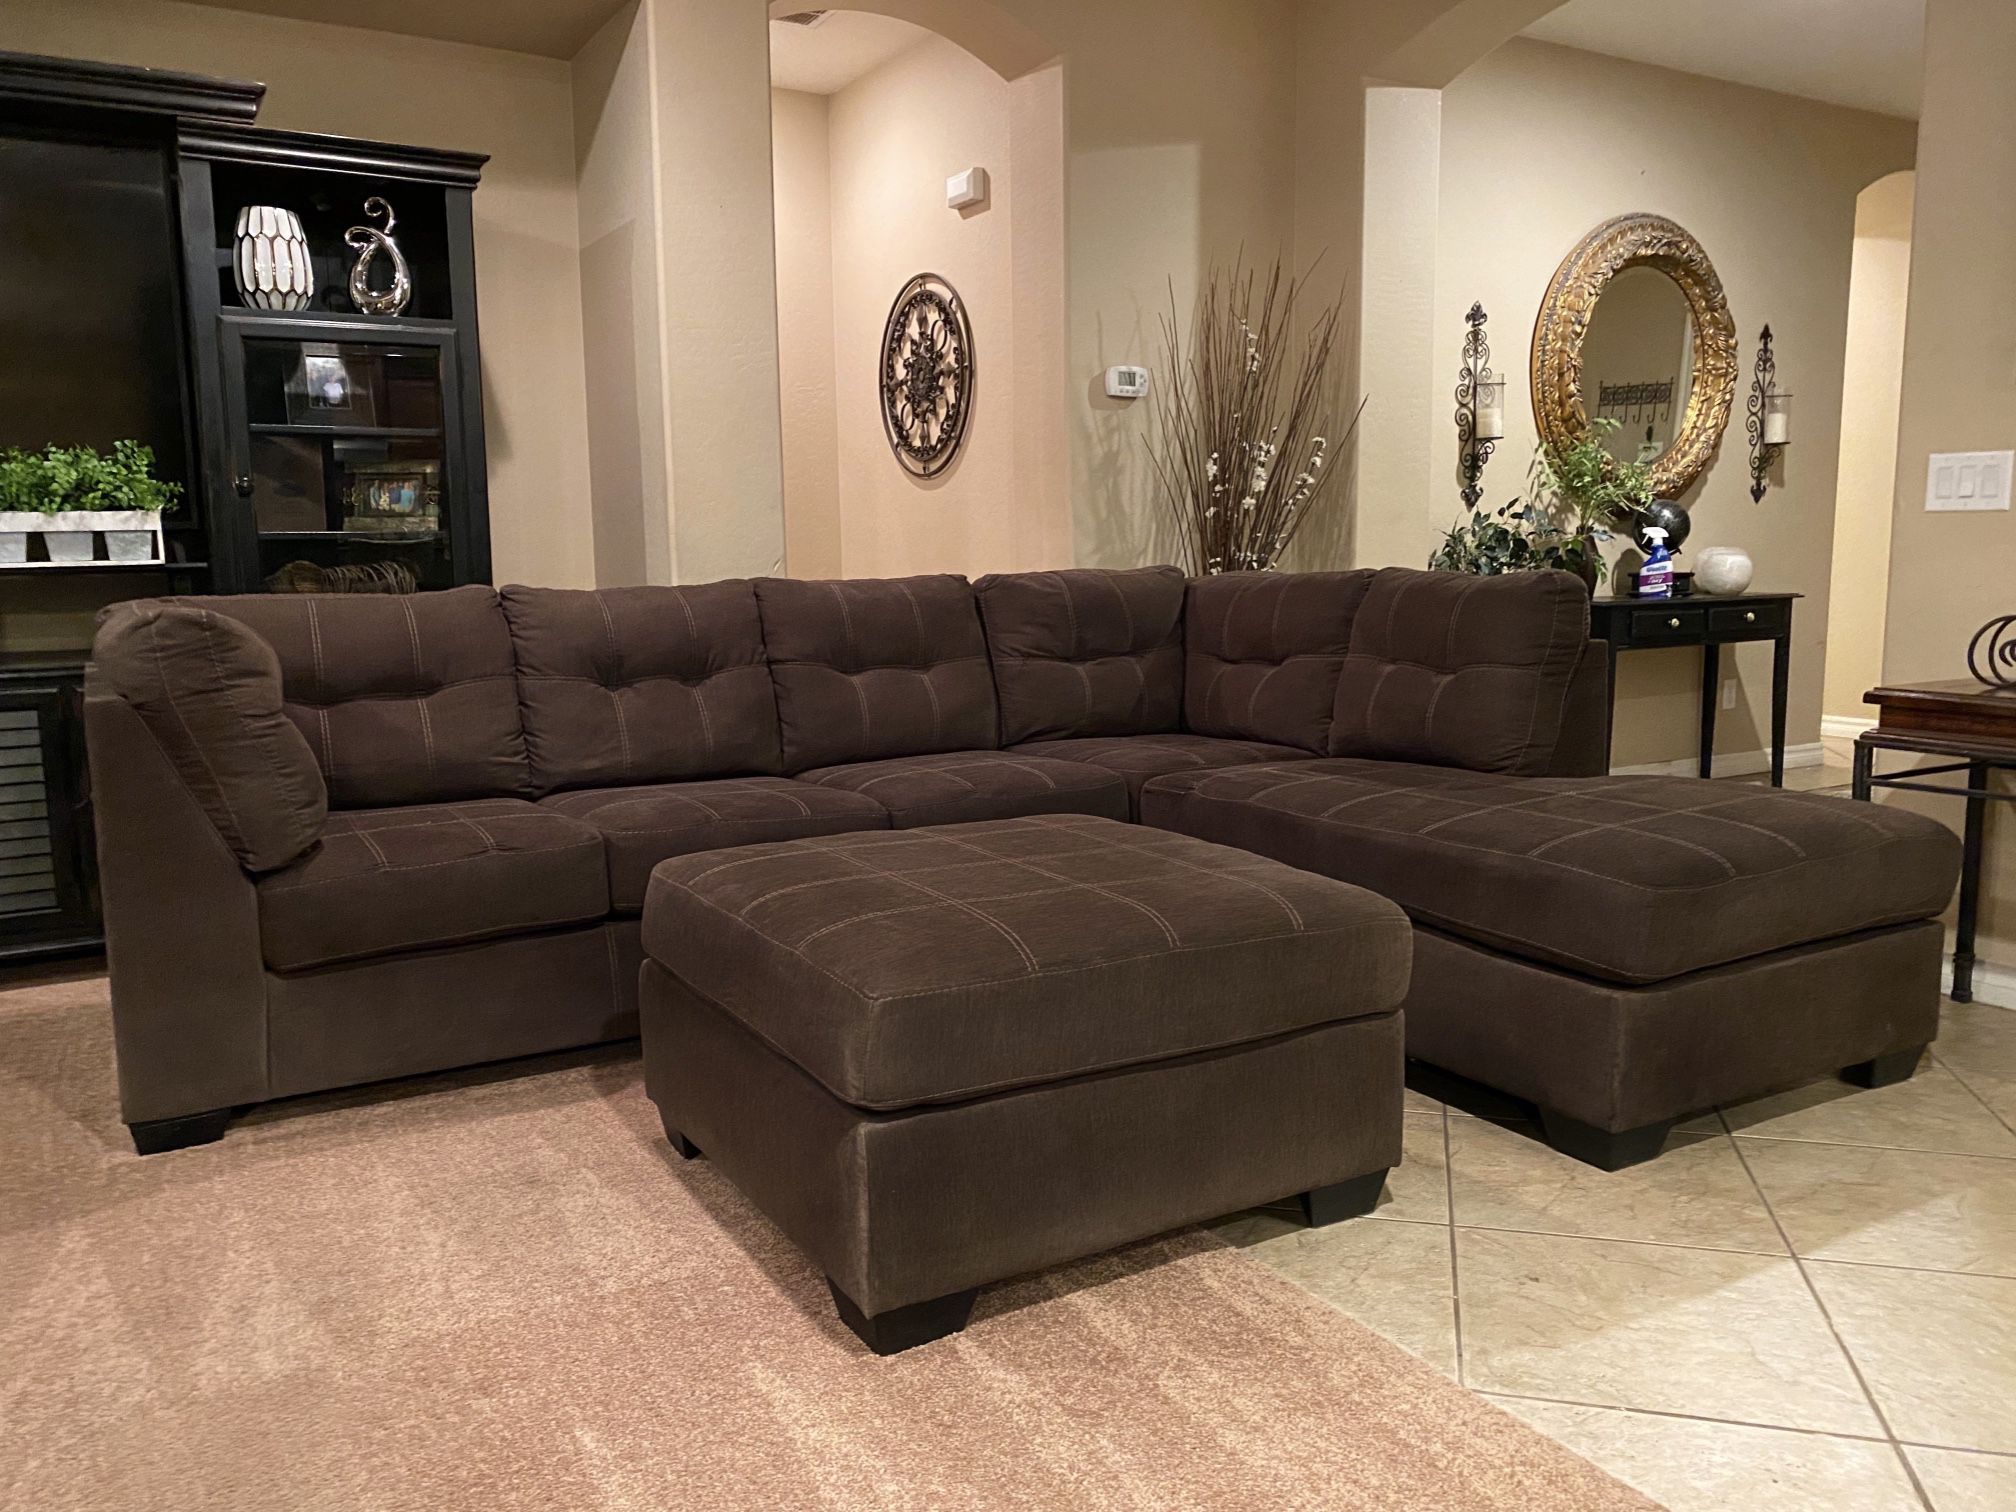 Sectional Couch (ottoman not included)